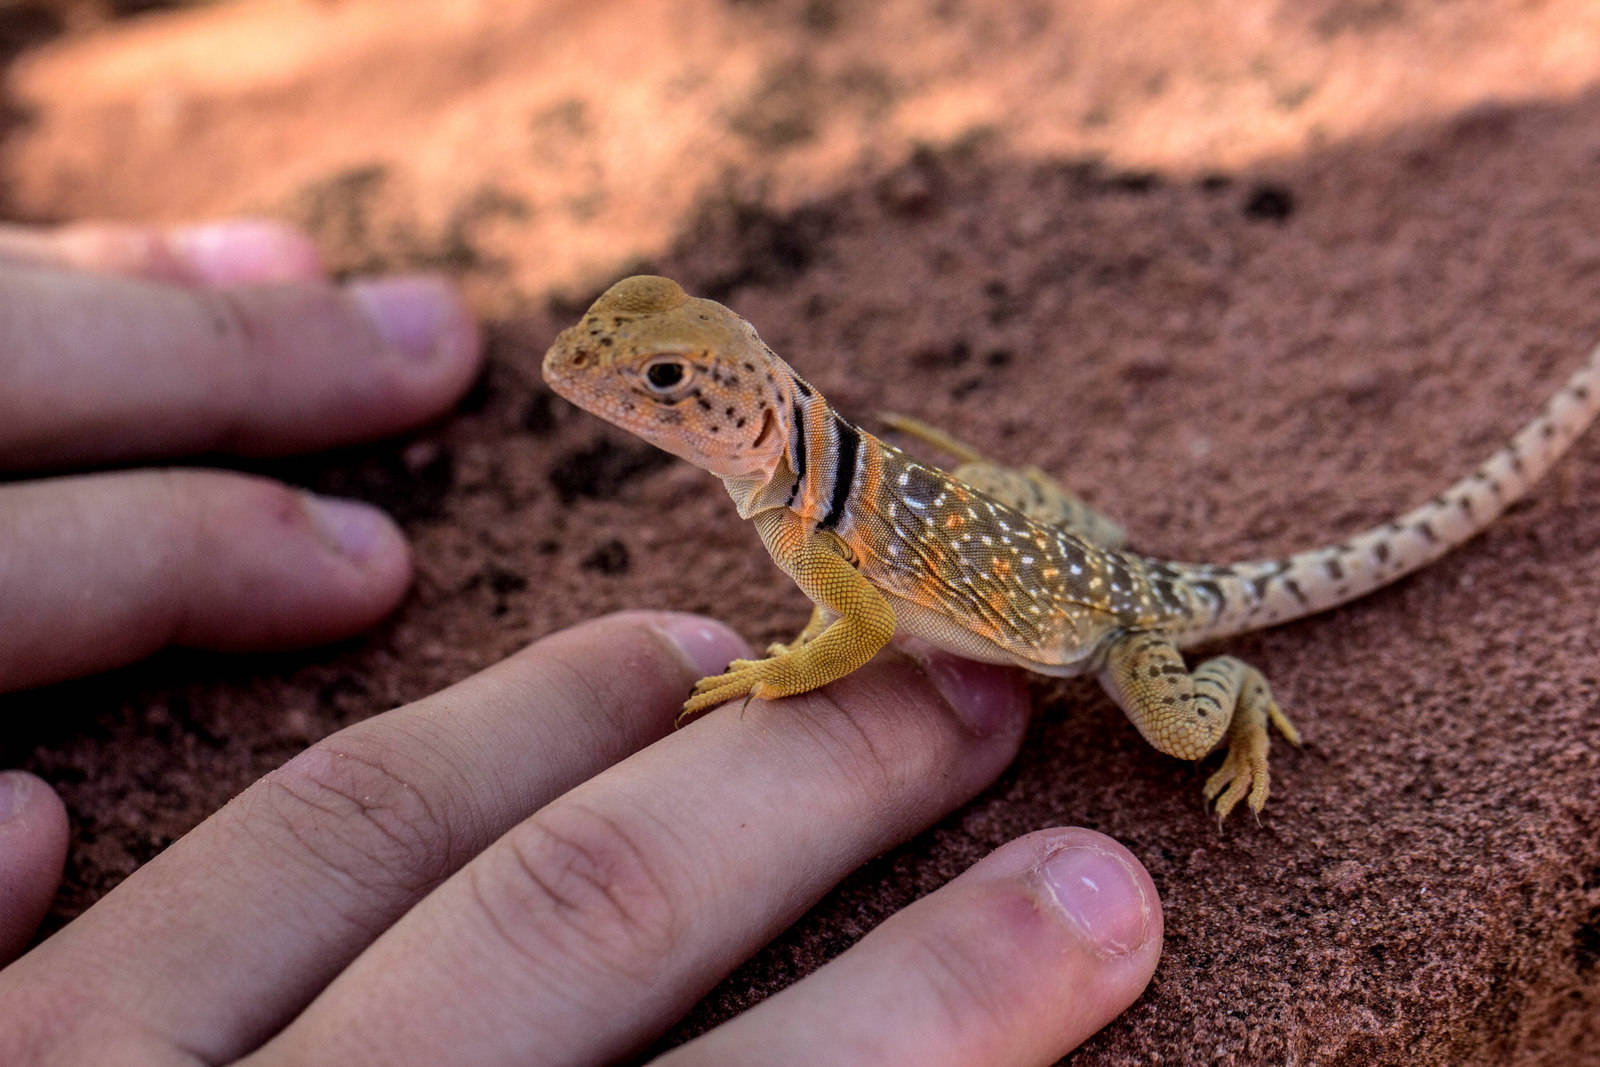 Vibrant and Unique Beauty: A Close-Up Shot of a Small Common Collared Lizard Wallpaper